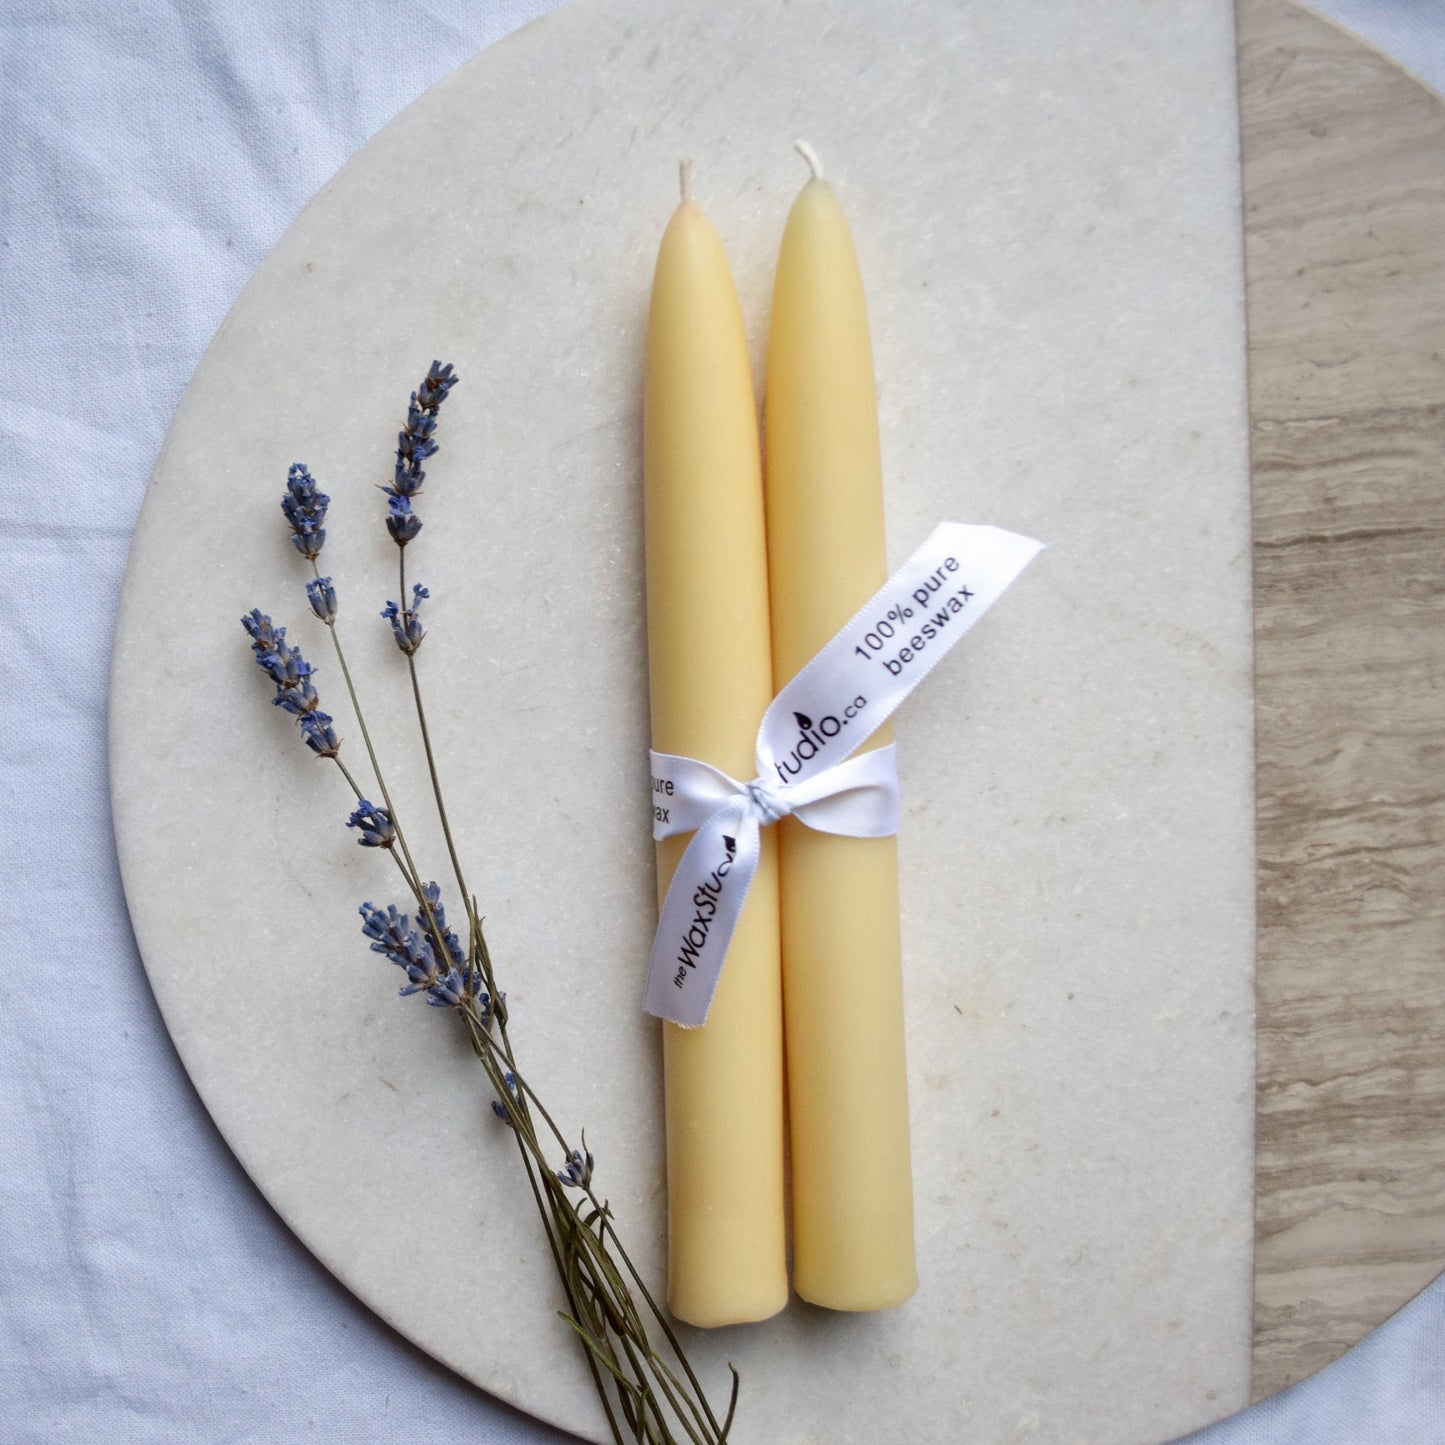 Cream Beeswax Tapers 8" PAIR of 2 / Ivory, Beeswax, Tapers, Candles, Taper Candles, Beeswax Candles